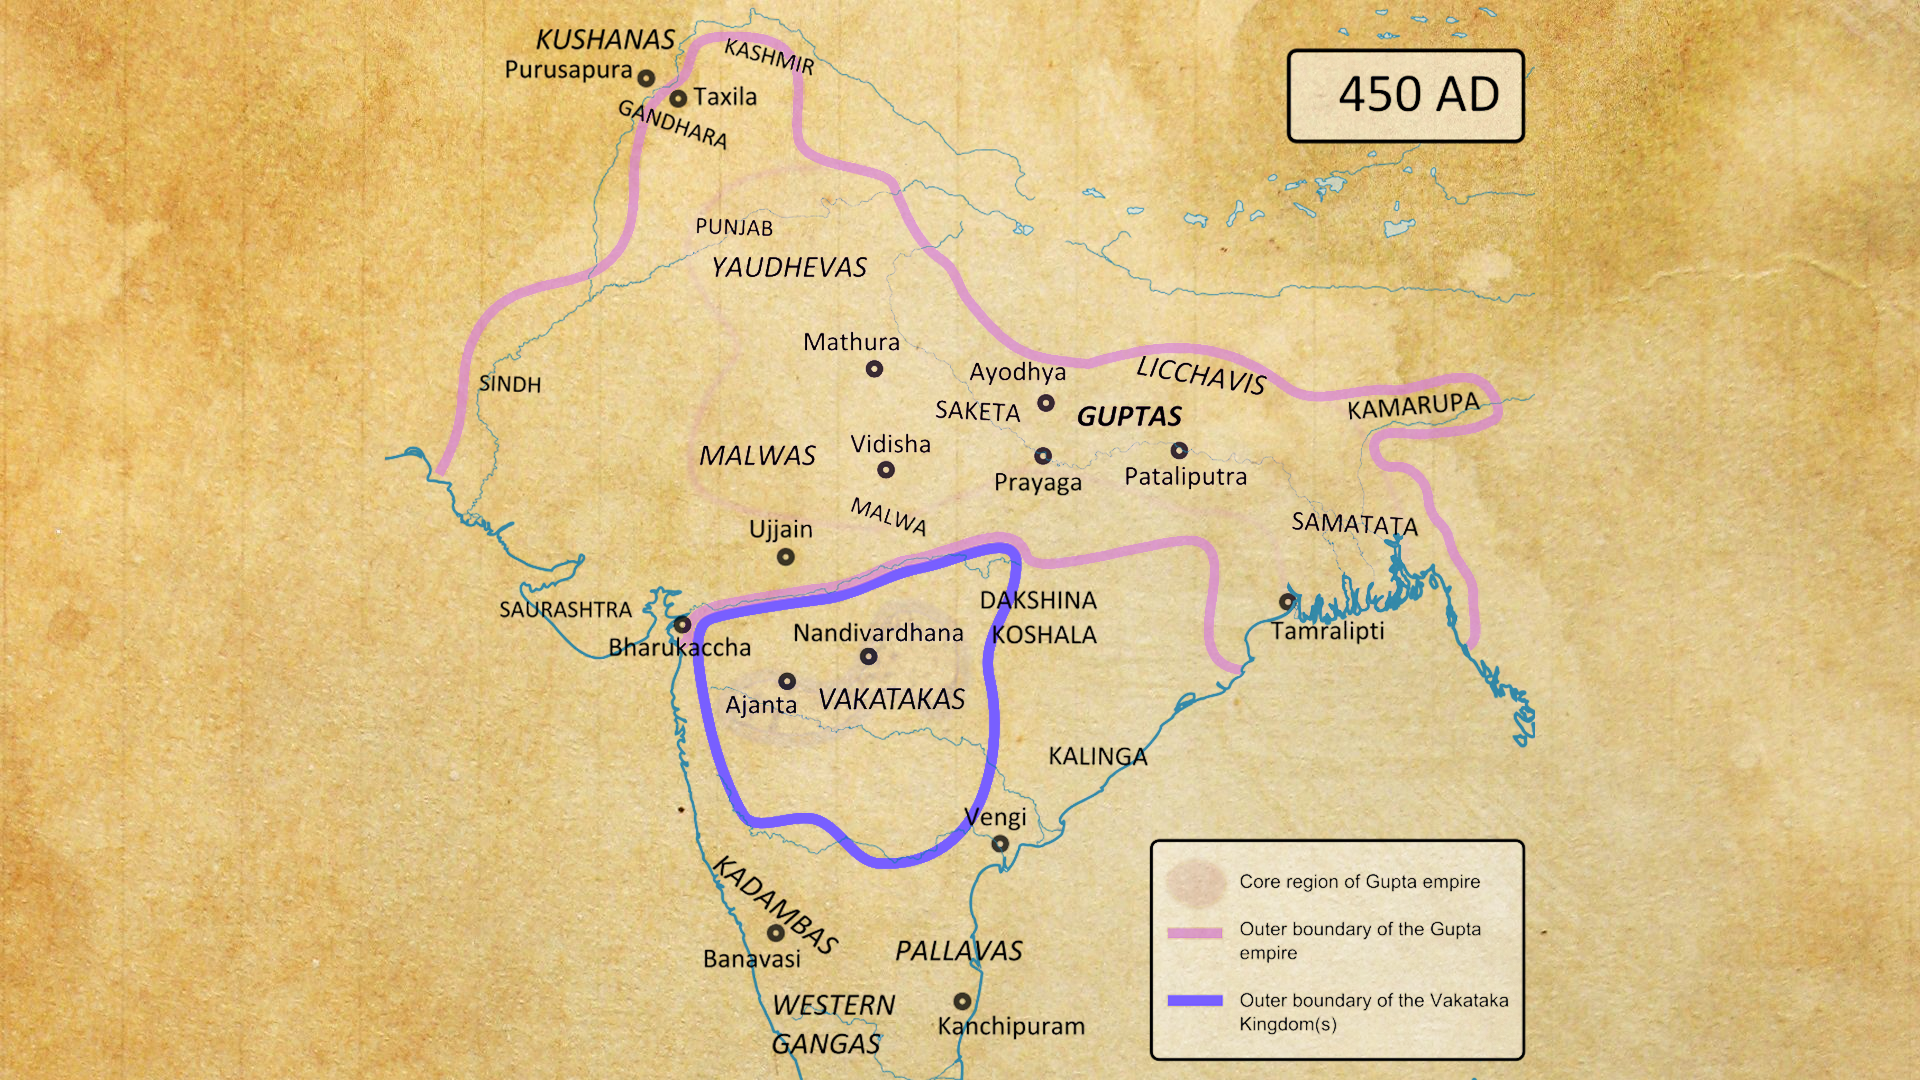 Extent of the Gupta Empire in mid-5th century CE